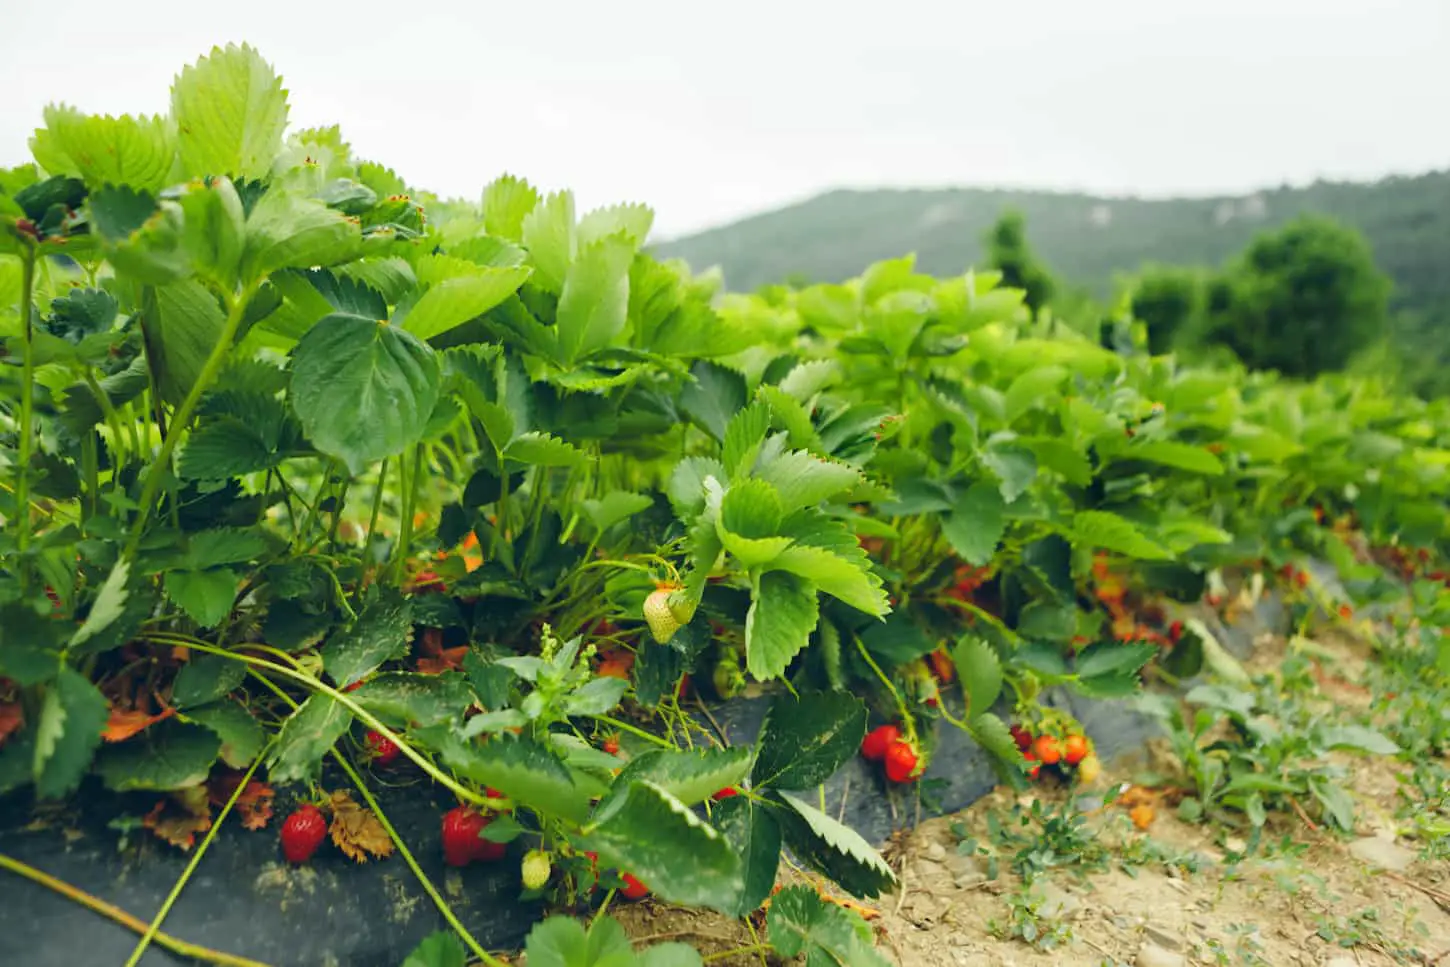 An image of strawberry bushes on a strawberry field on a farm.